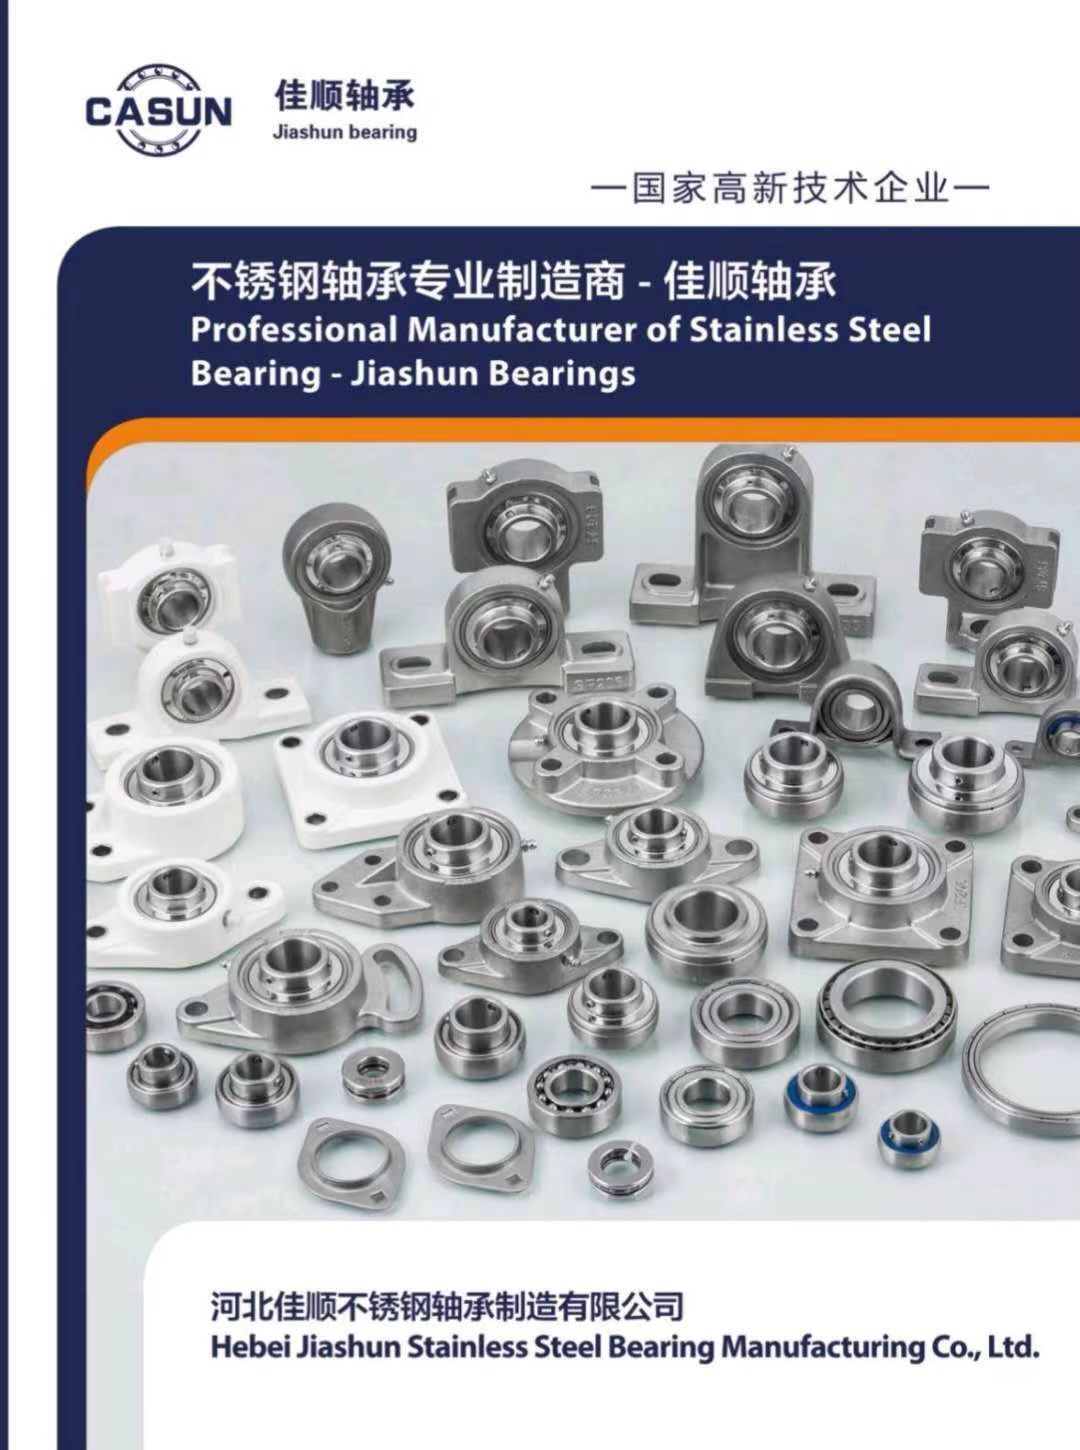 Specializing in the production of stainless steel bearings and non-standard bearing bushings